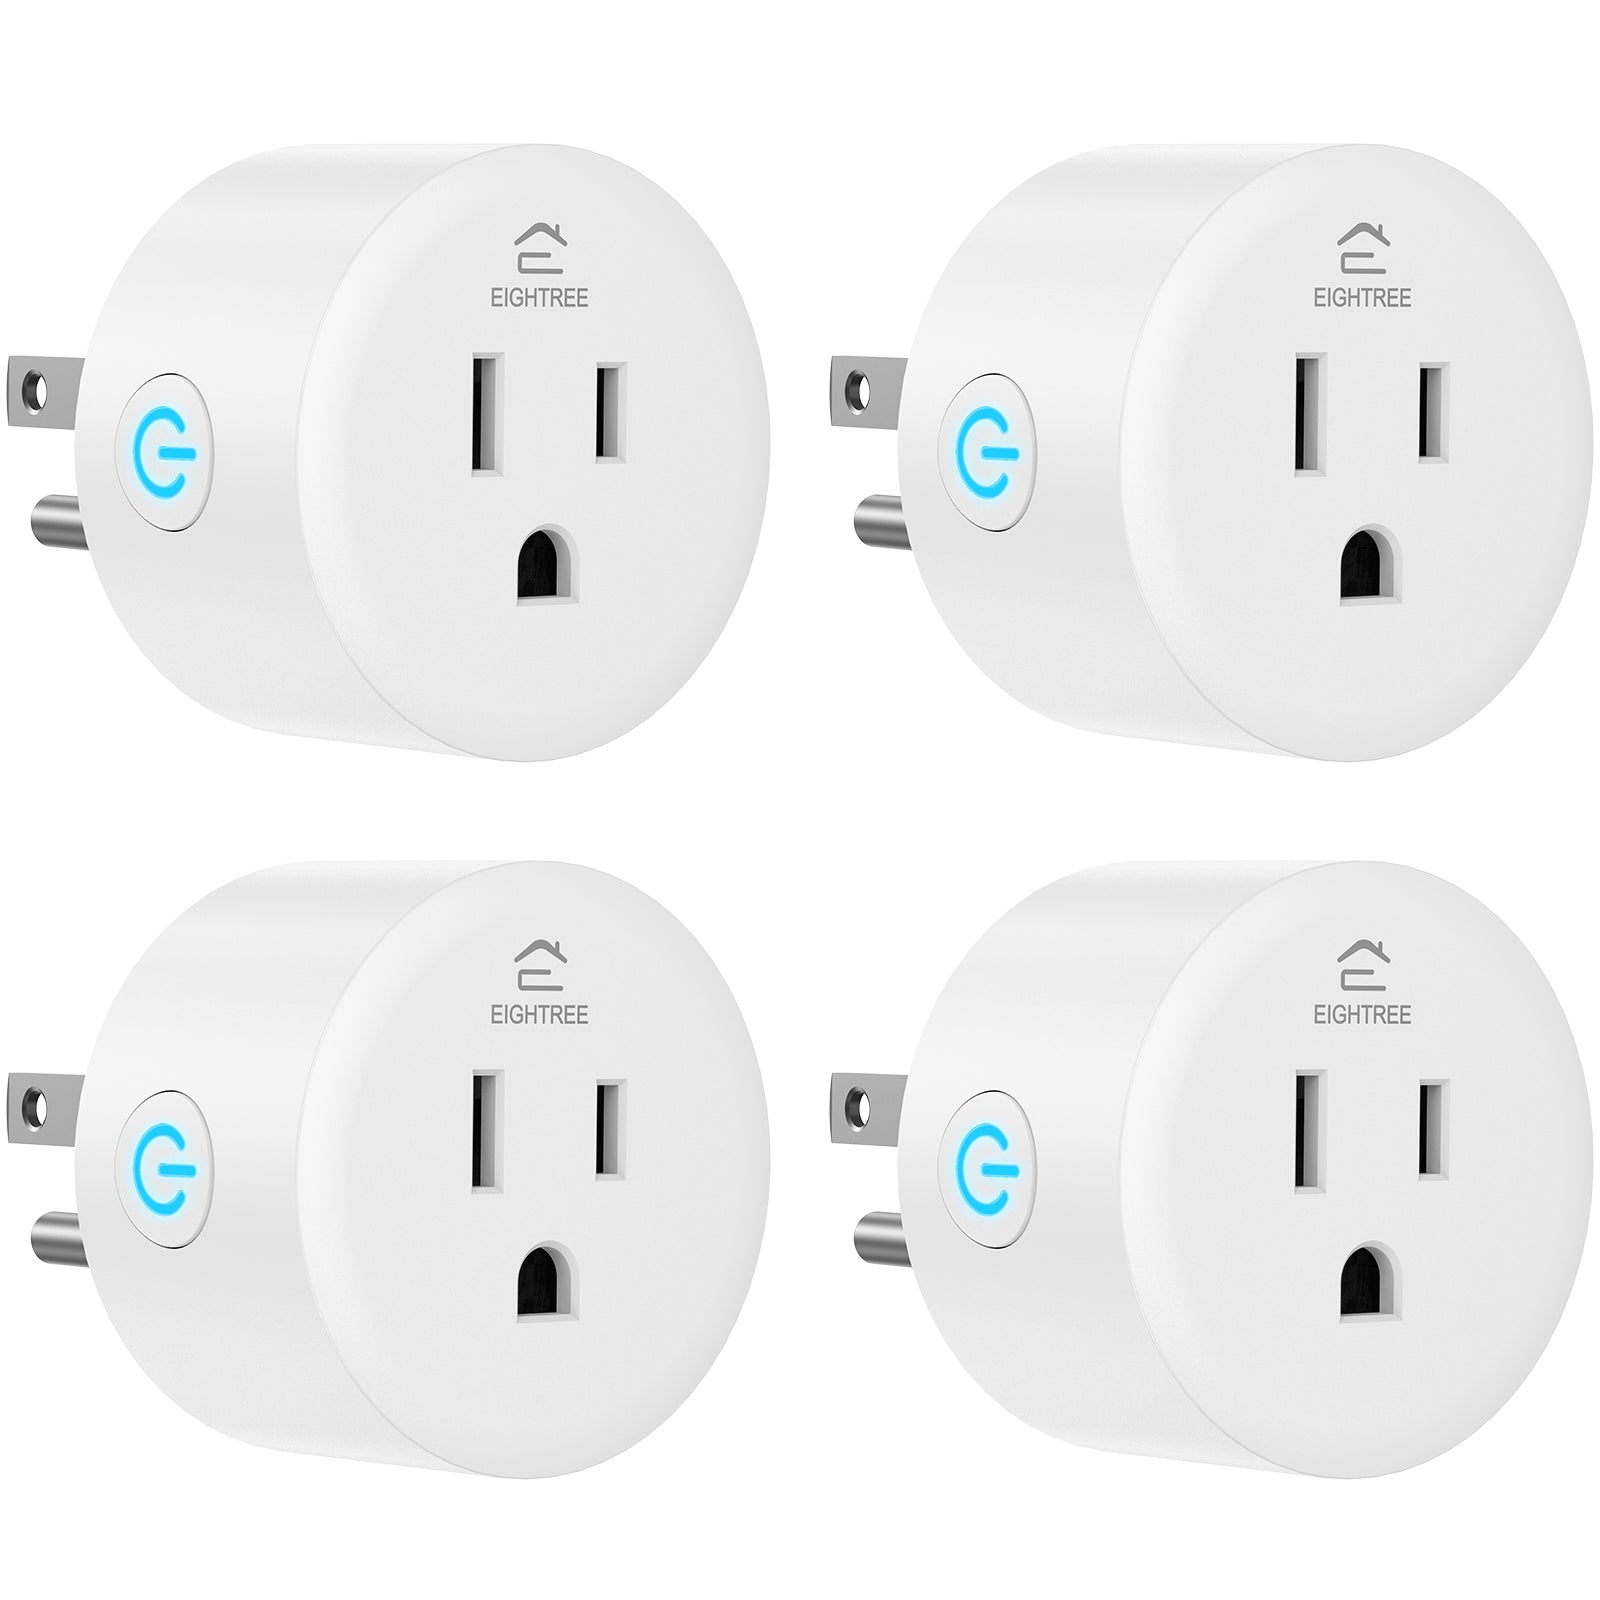 Geek Daily Deals Jul. 25, 2018: 2-Pack of Double-Duty Smart Plugs for $28!  - GeekMom